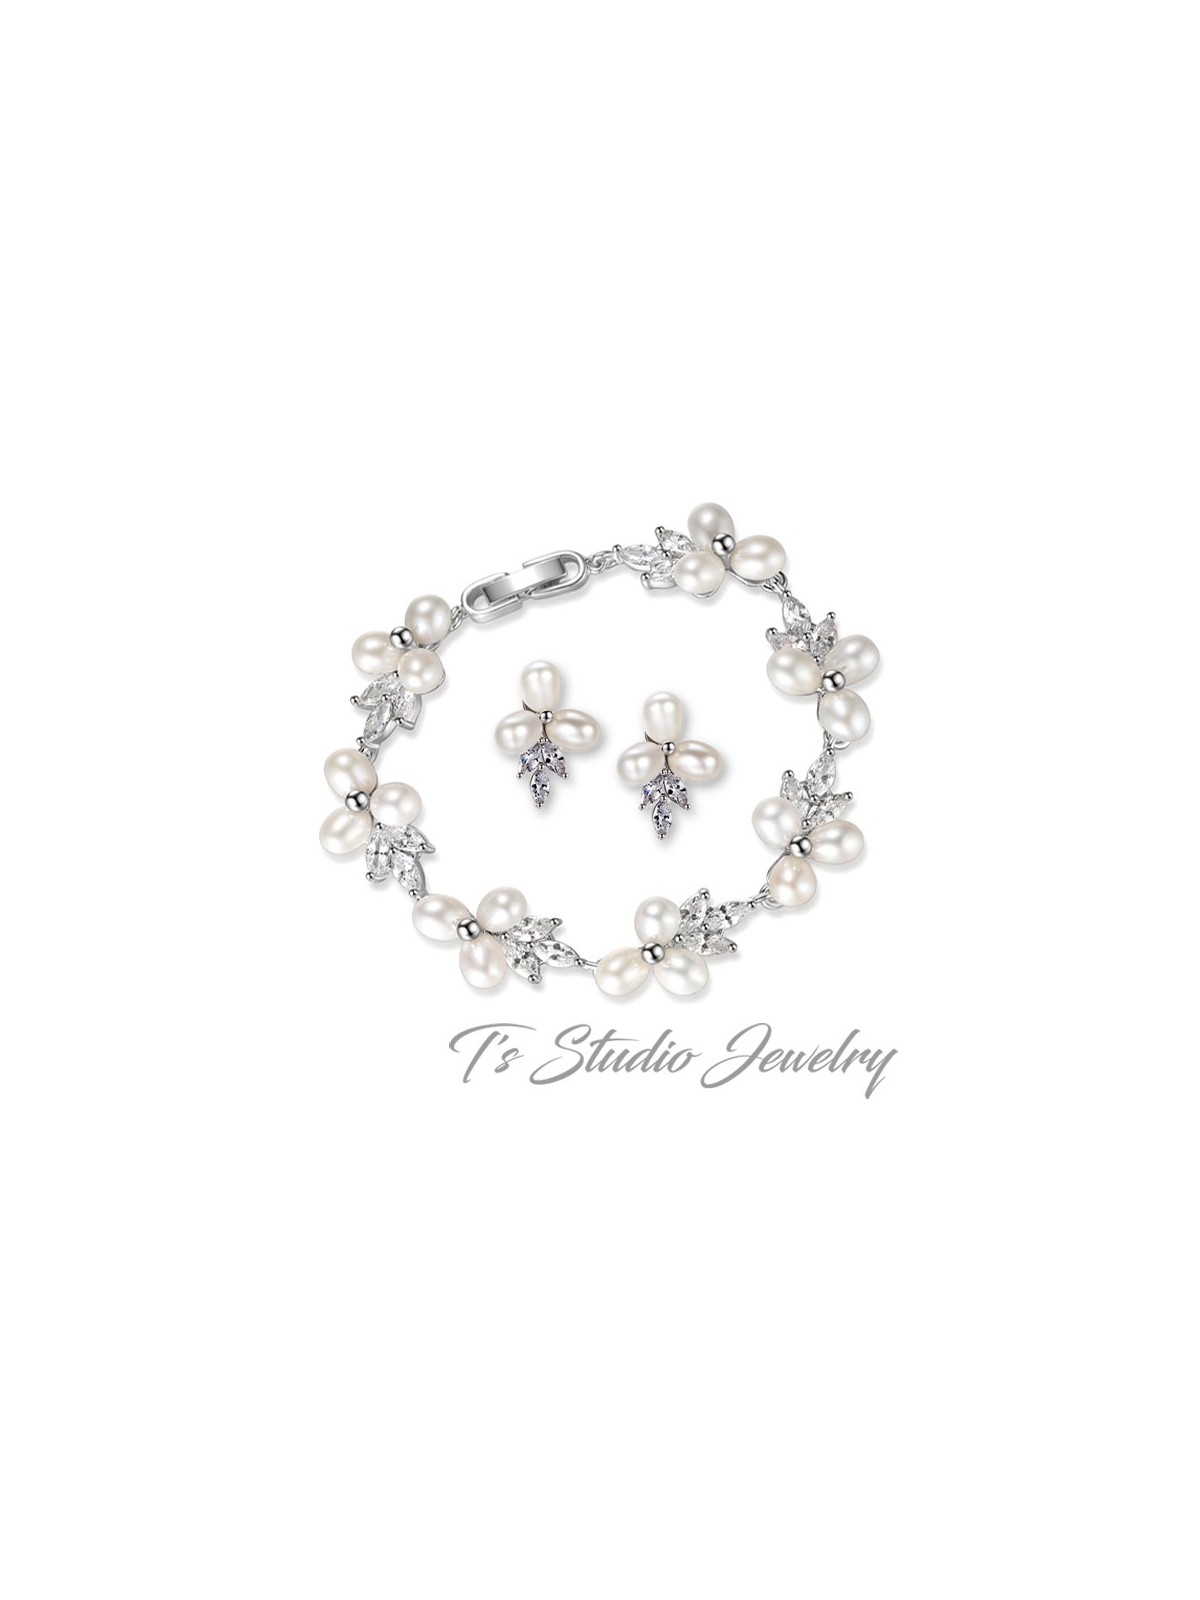 Freshwater Pearl and CZ Crystal Bridal Bracelet